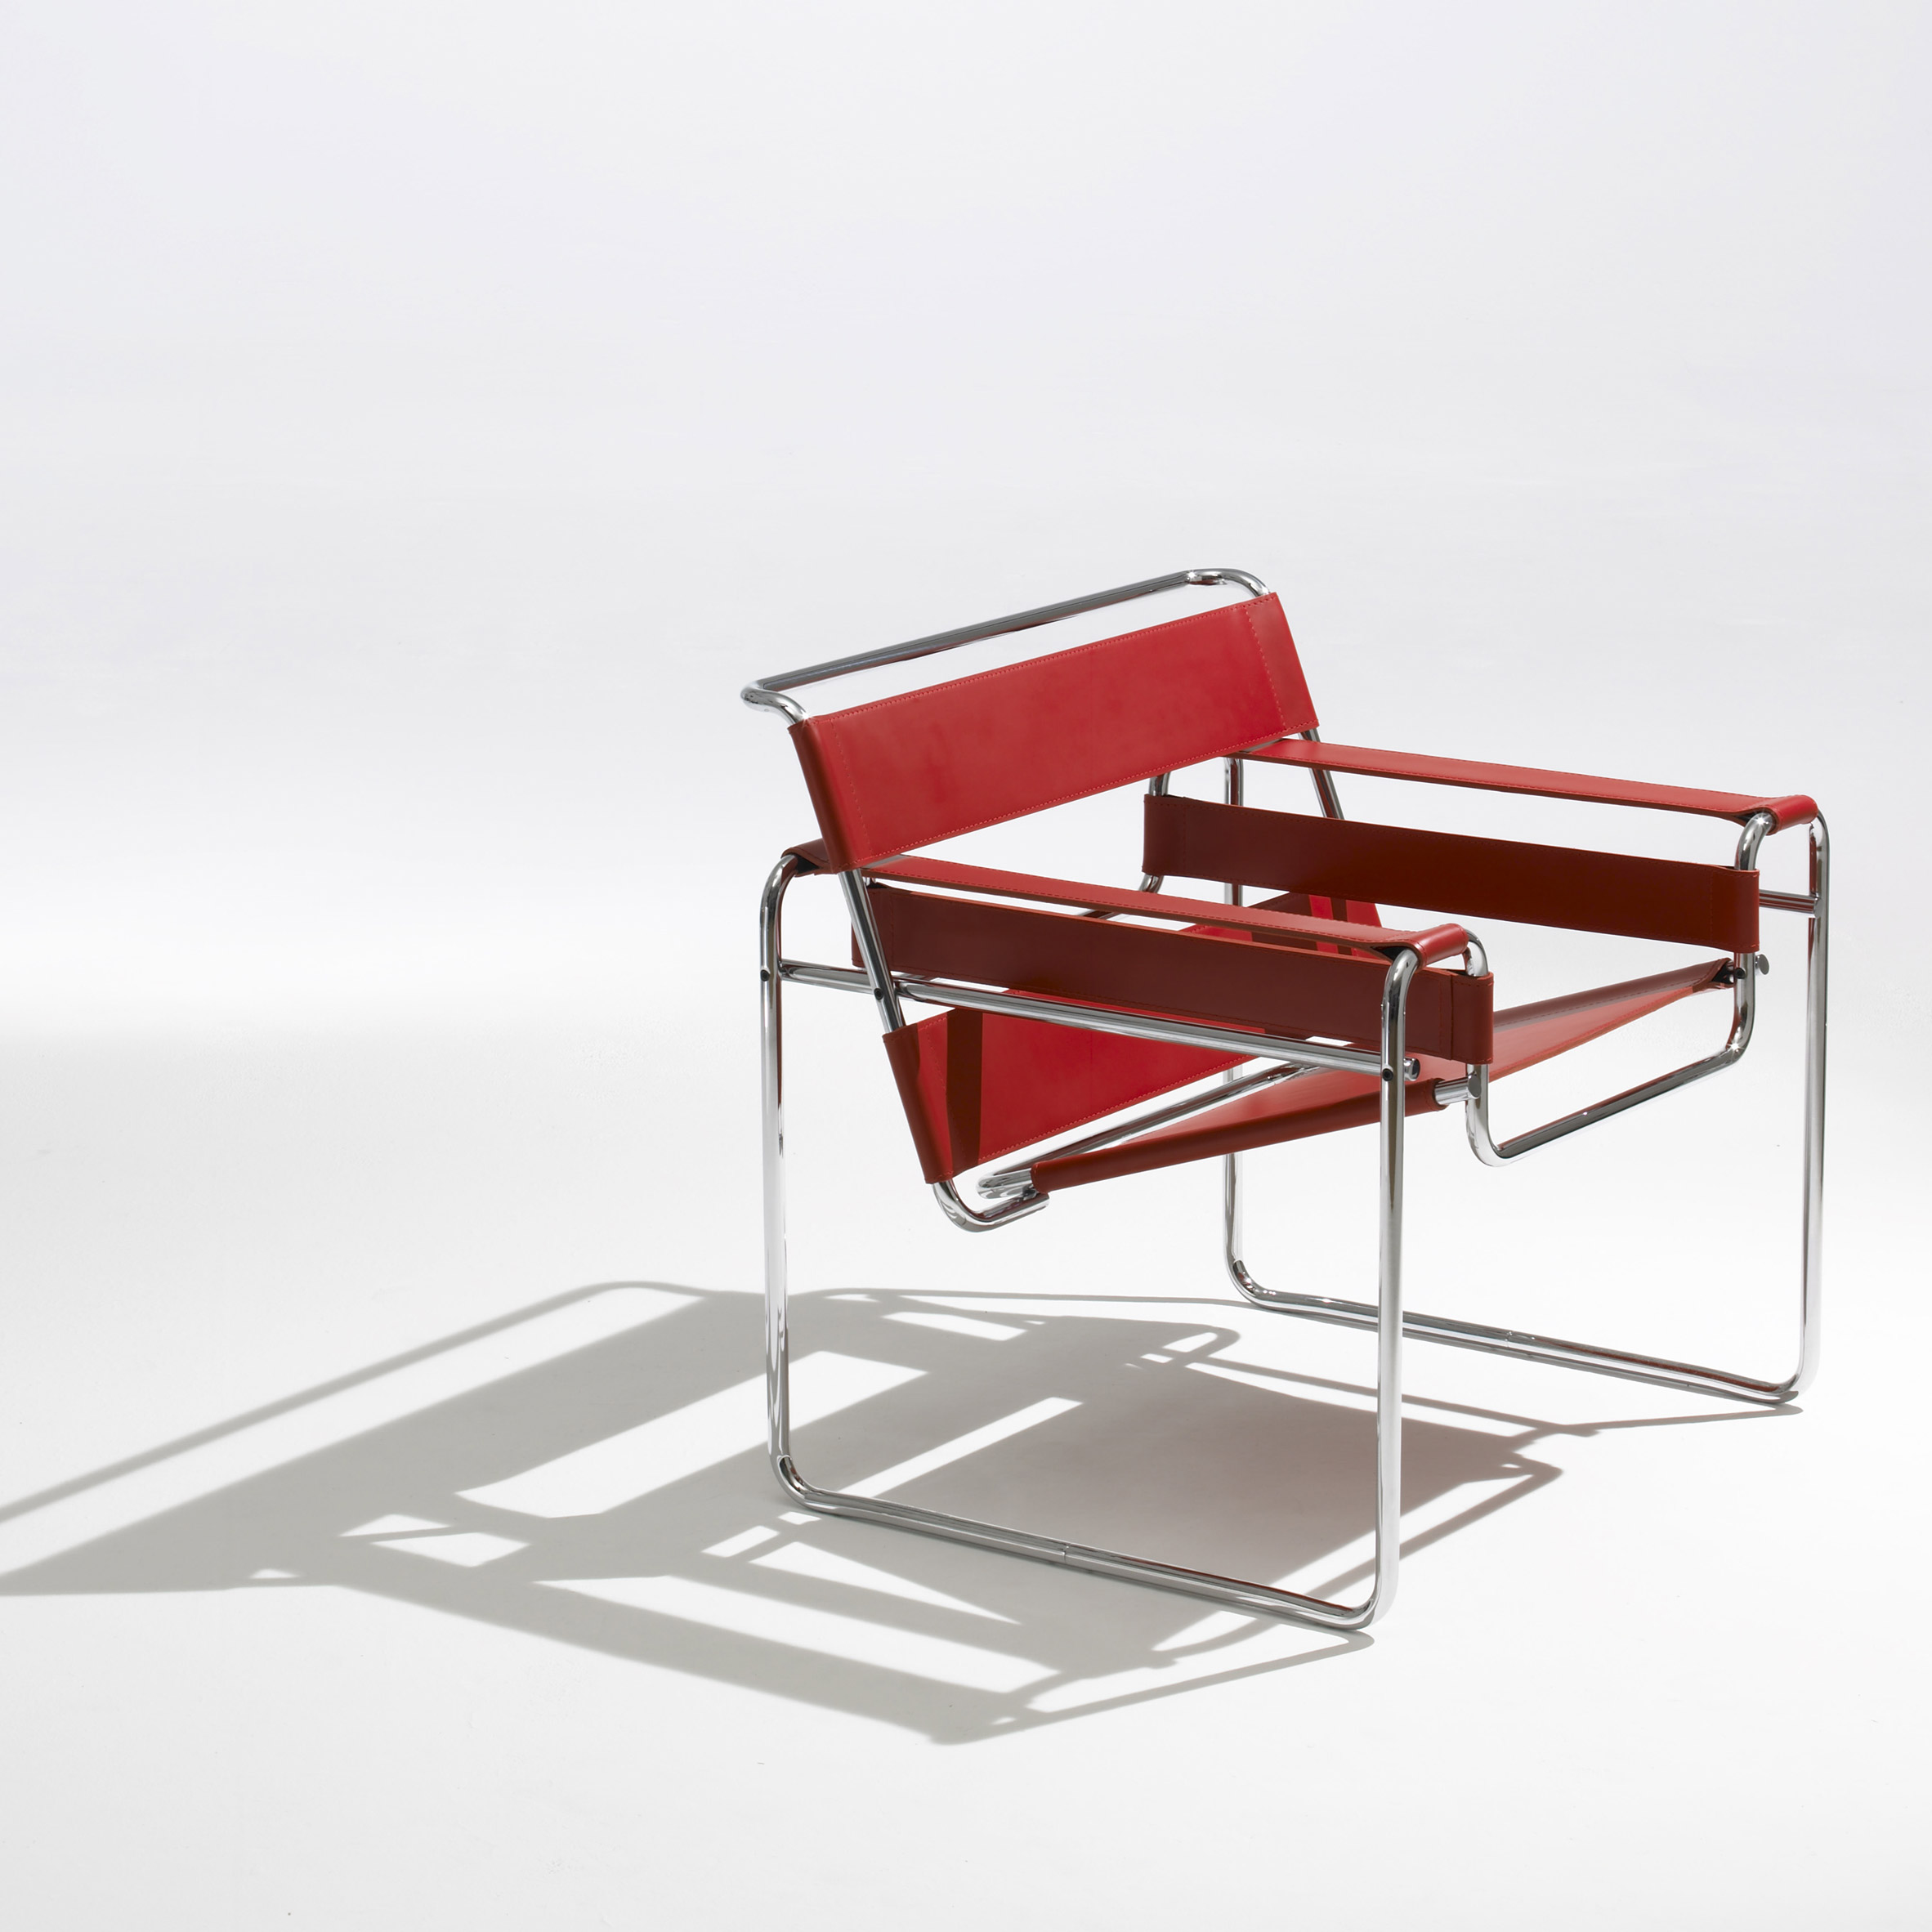 10 iconic Bauhaus furniture designs: chairs, tables, a lamp and a chess set